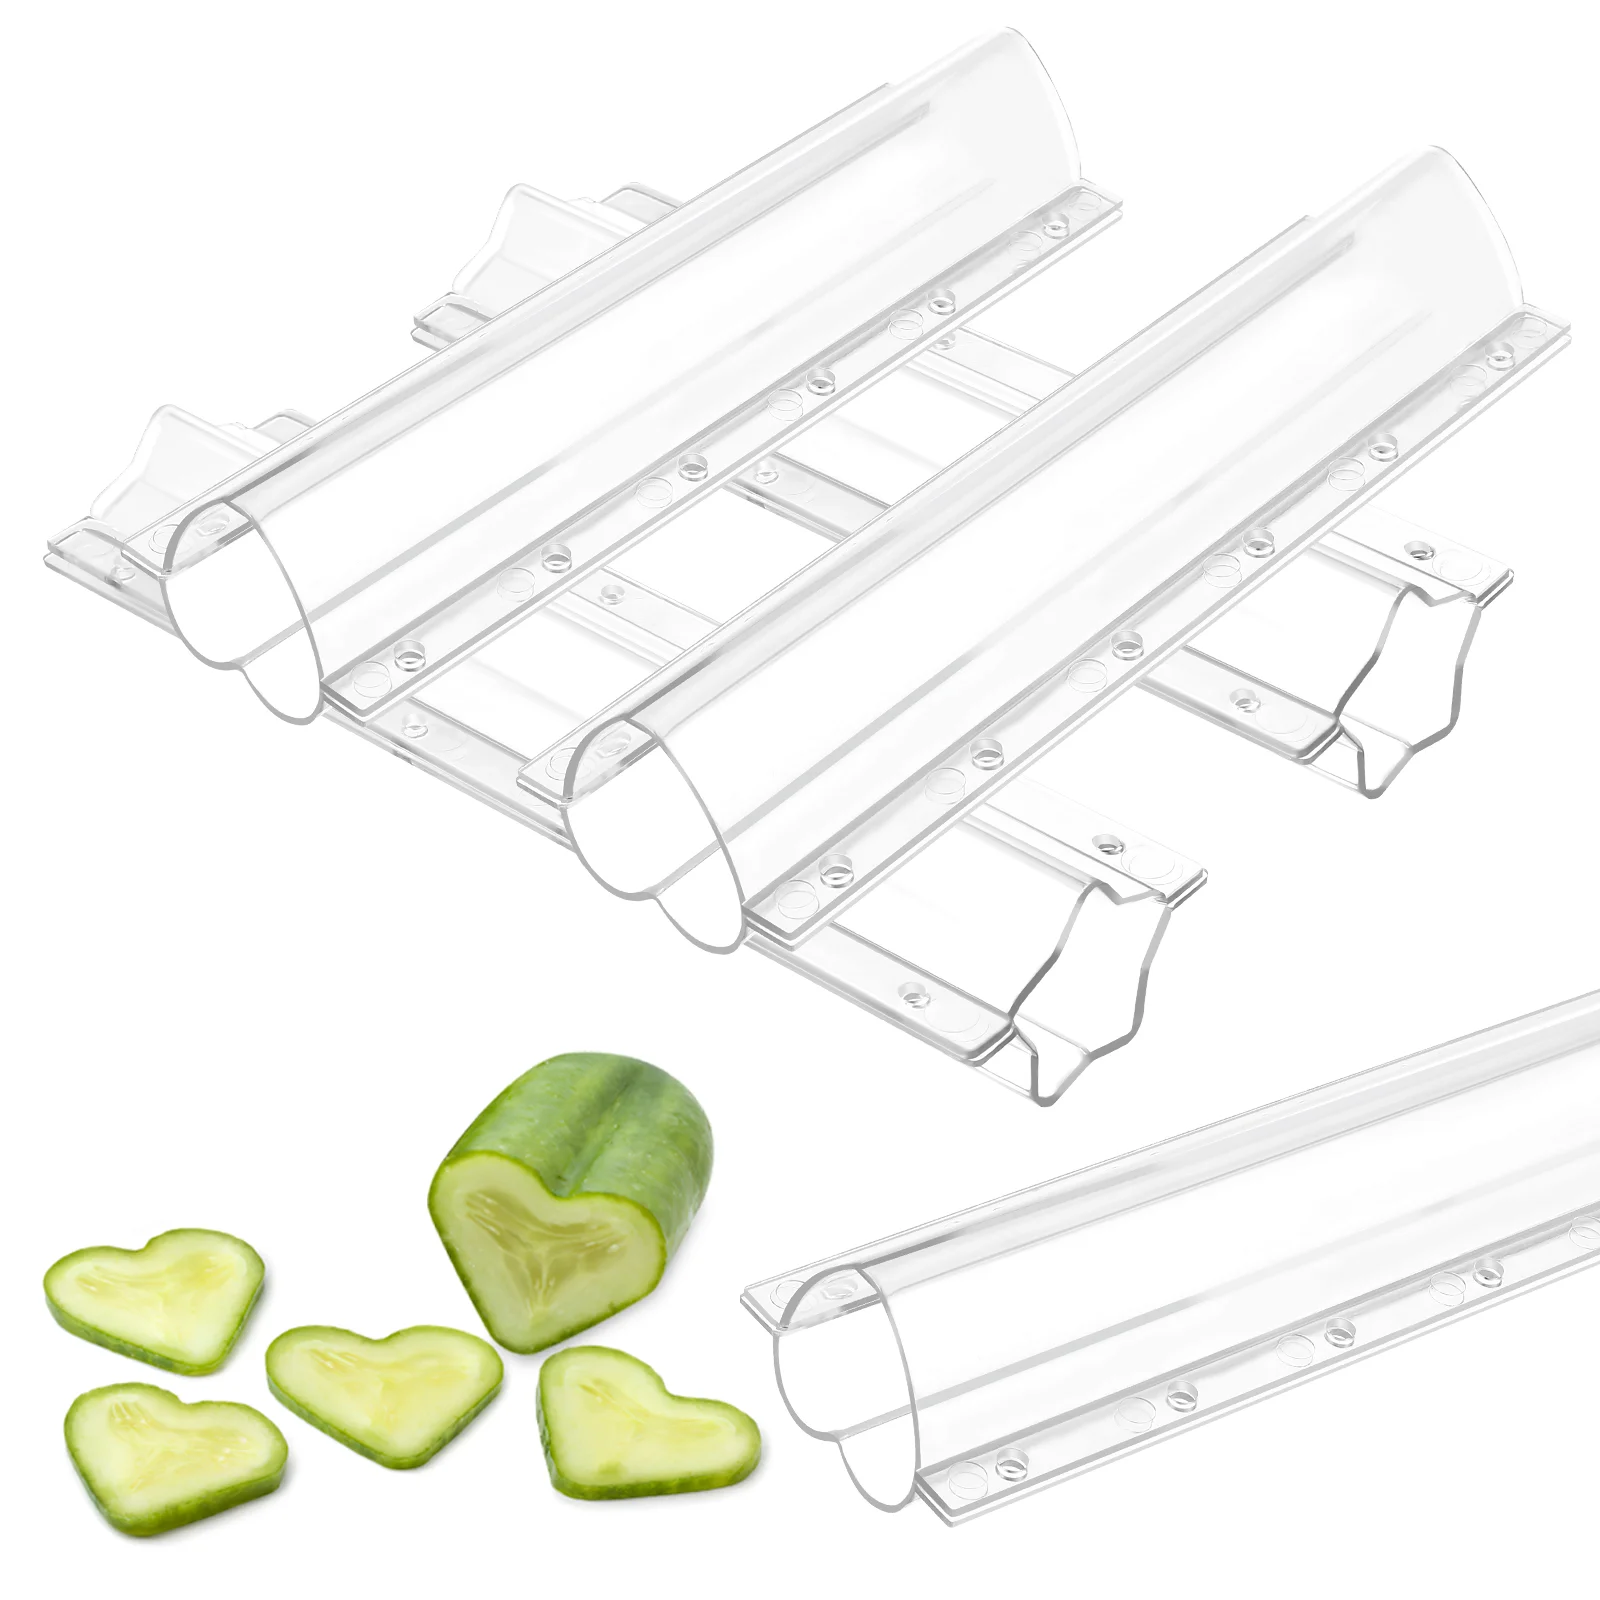 4 Pcs Fruit Molds Decorating Tools Chocolate Vegetable Growing Stereotypes Shaping Star Cucumber Shaper